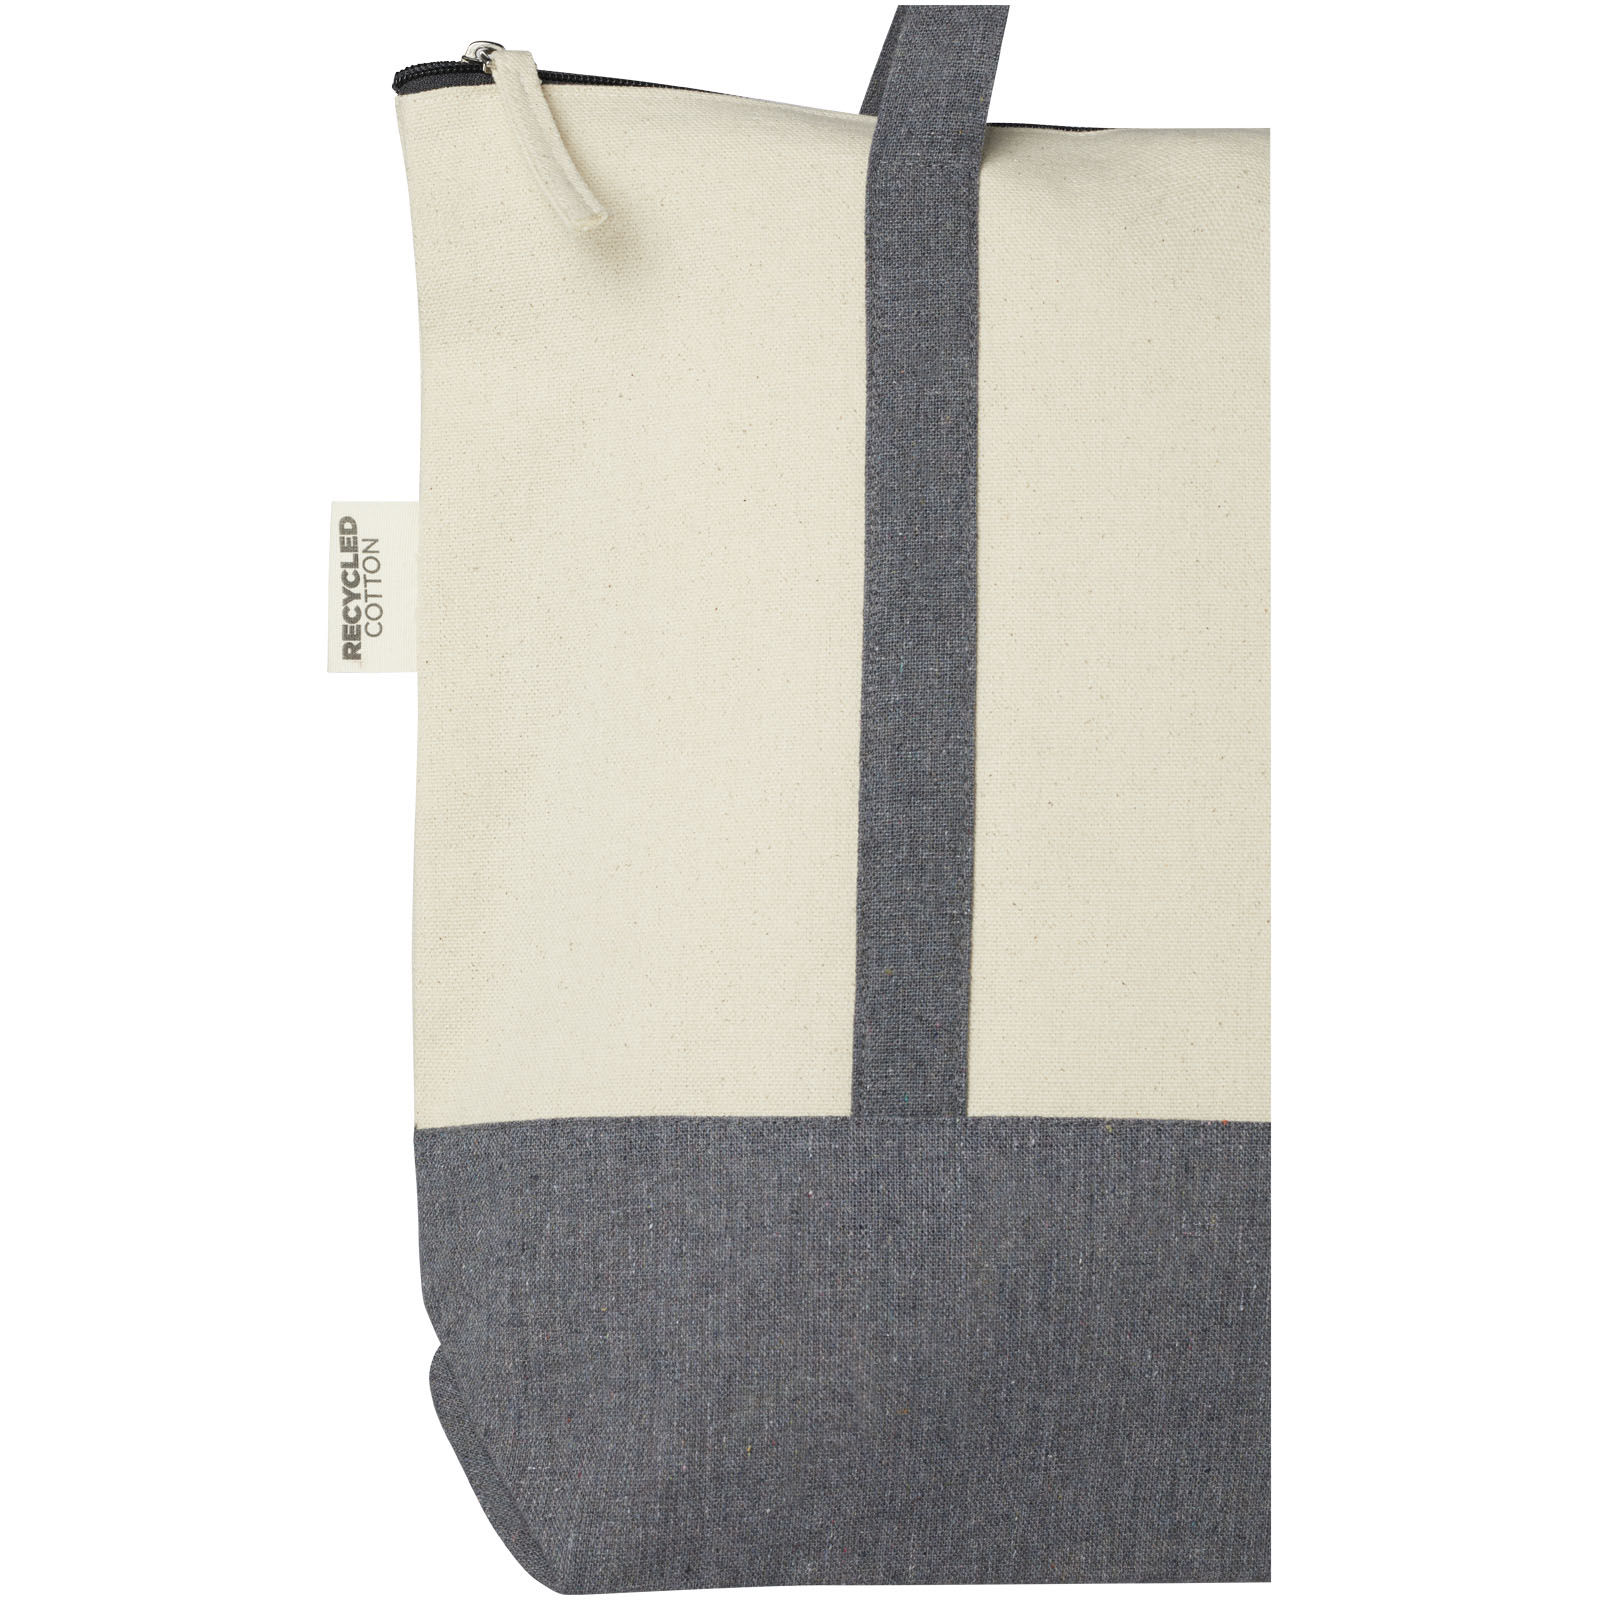 Advertising Shopping & Tote Bags - Repose 320 g/m² recycled cotton zippered tote bag 10L - 6